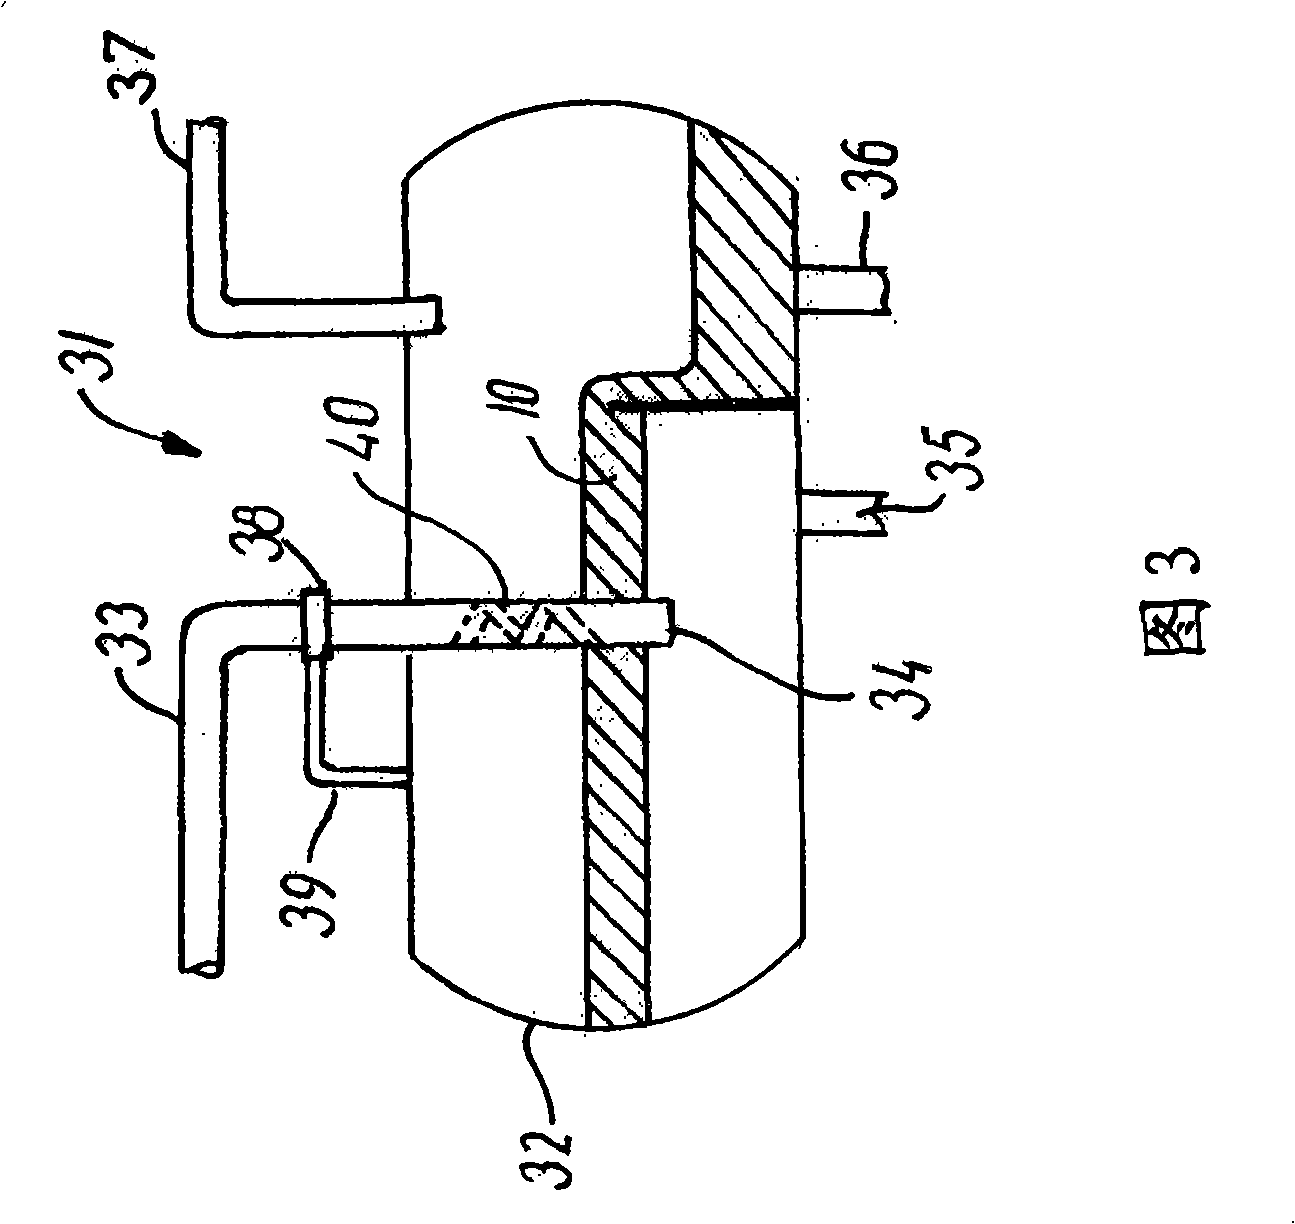 A gravity separator, and a method for separating a mixture containing water, oil, and gas